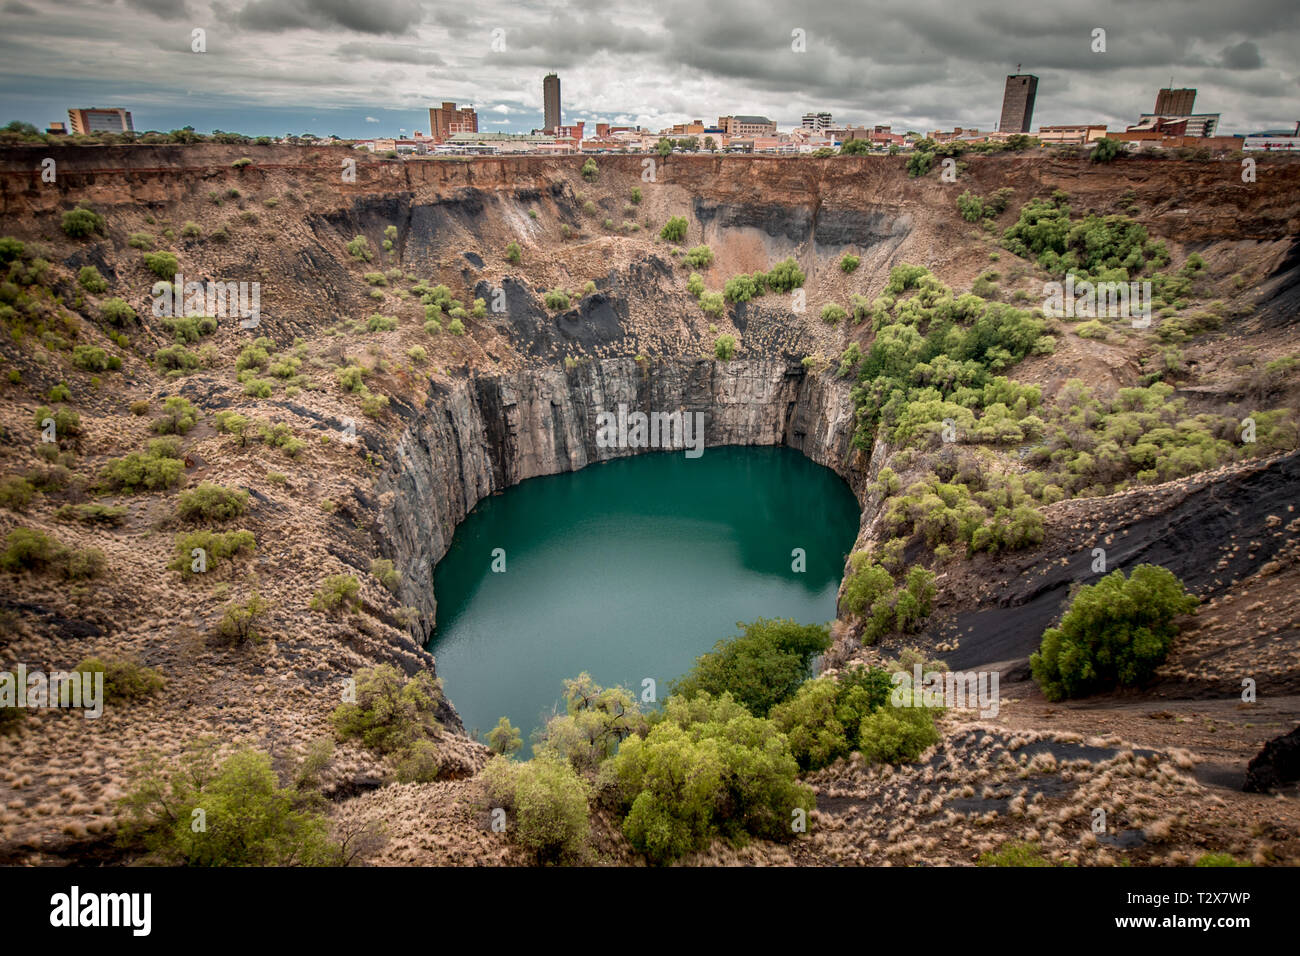 Wide View Of The Big Hole In Kimberley A Result Of The Mining Industry